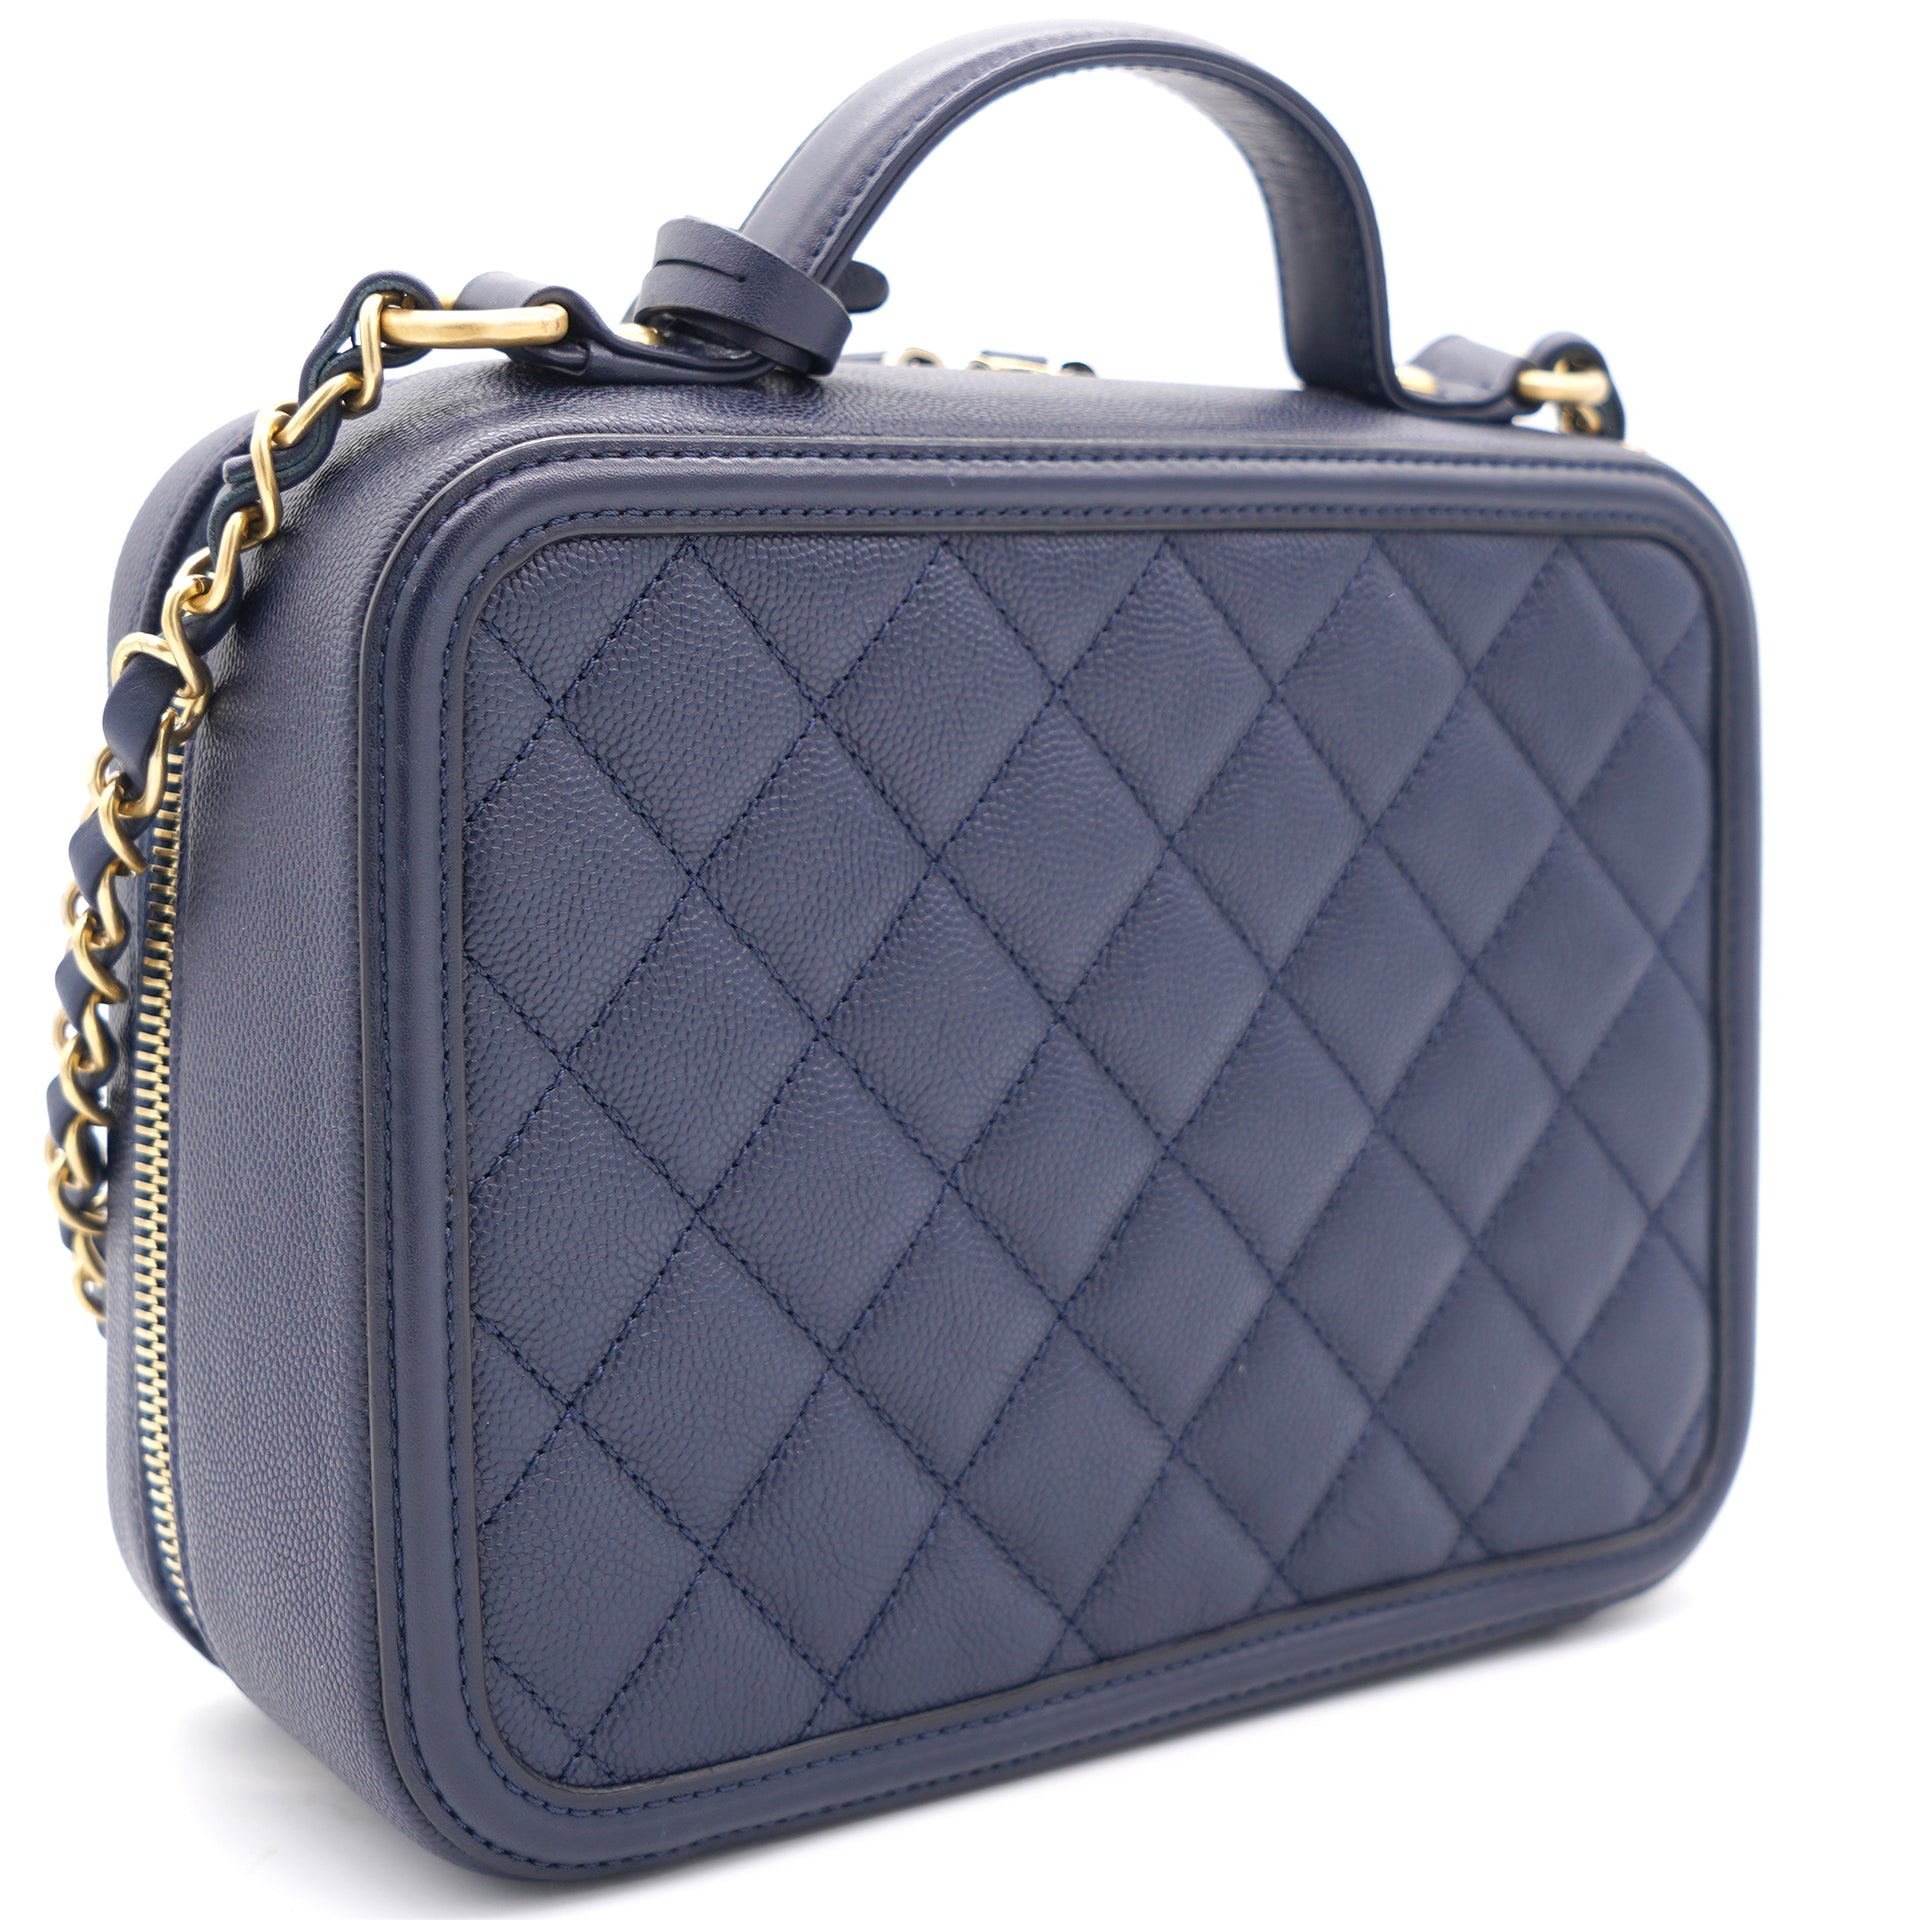 chanel vanity case outfit